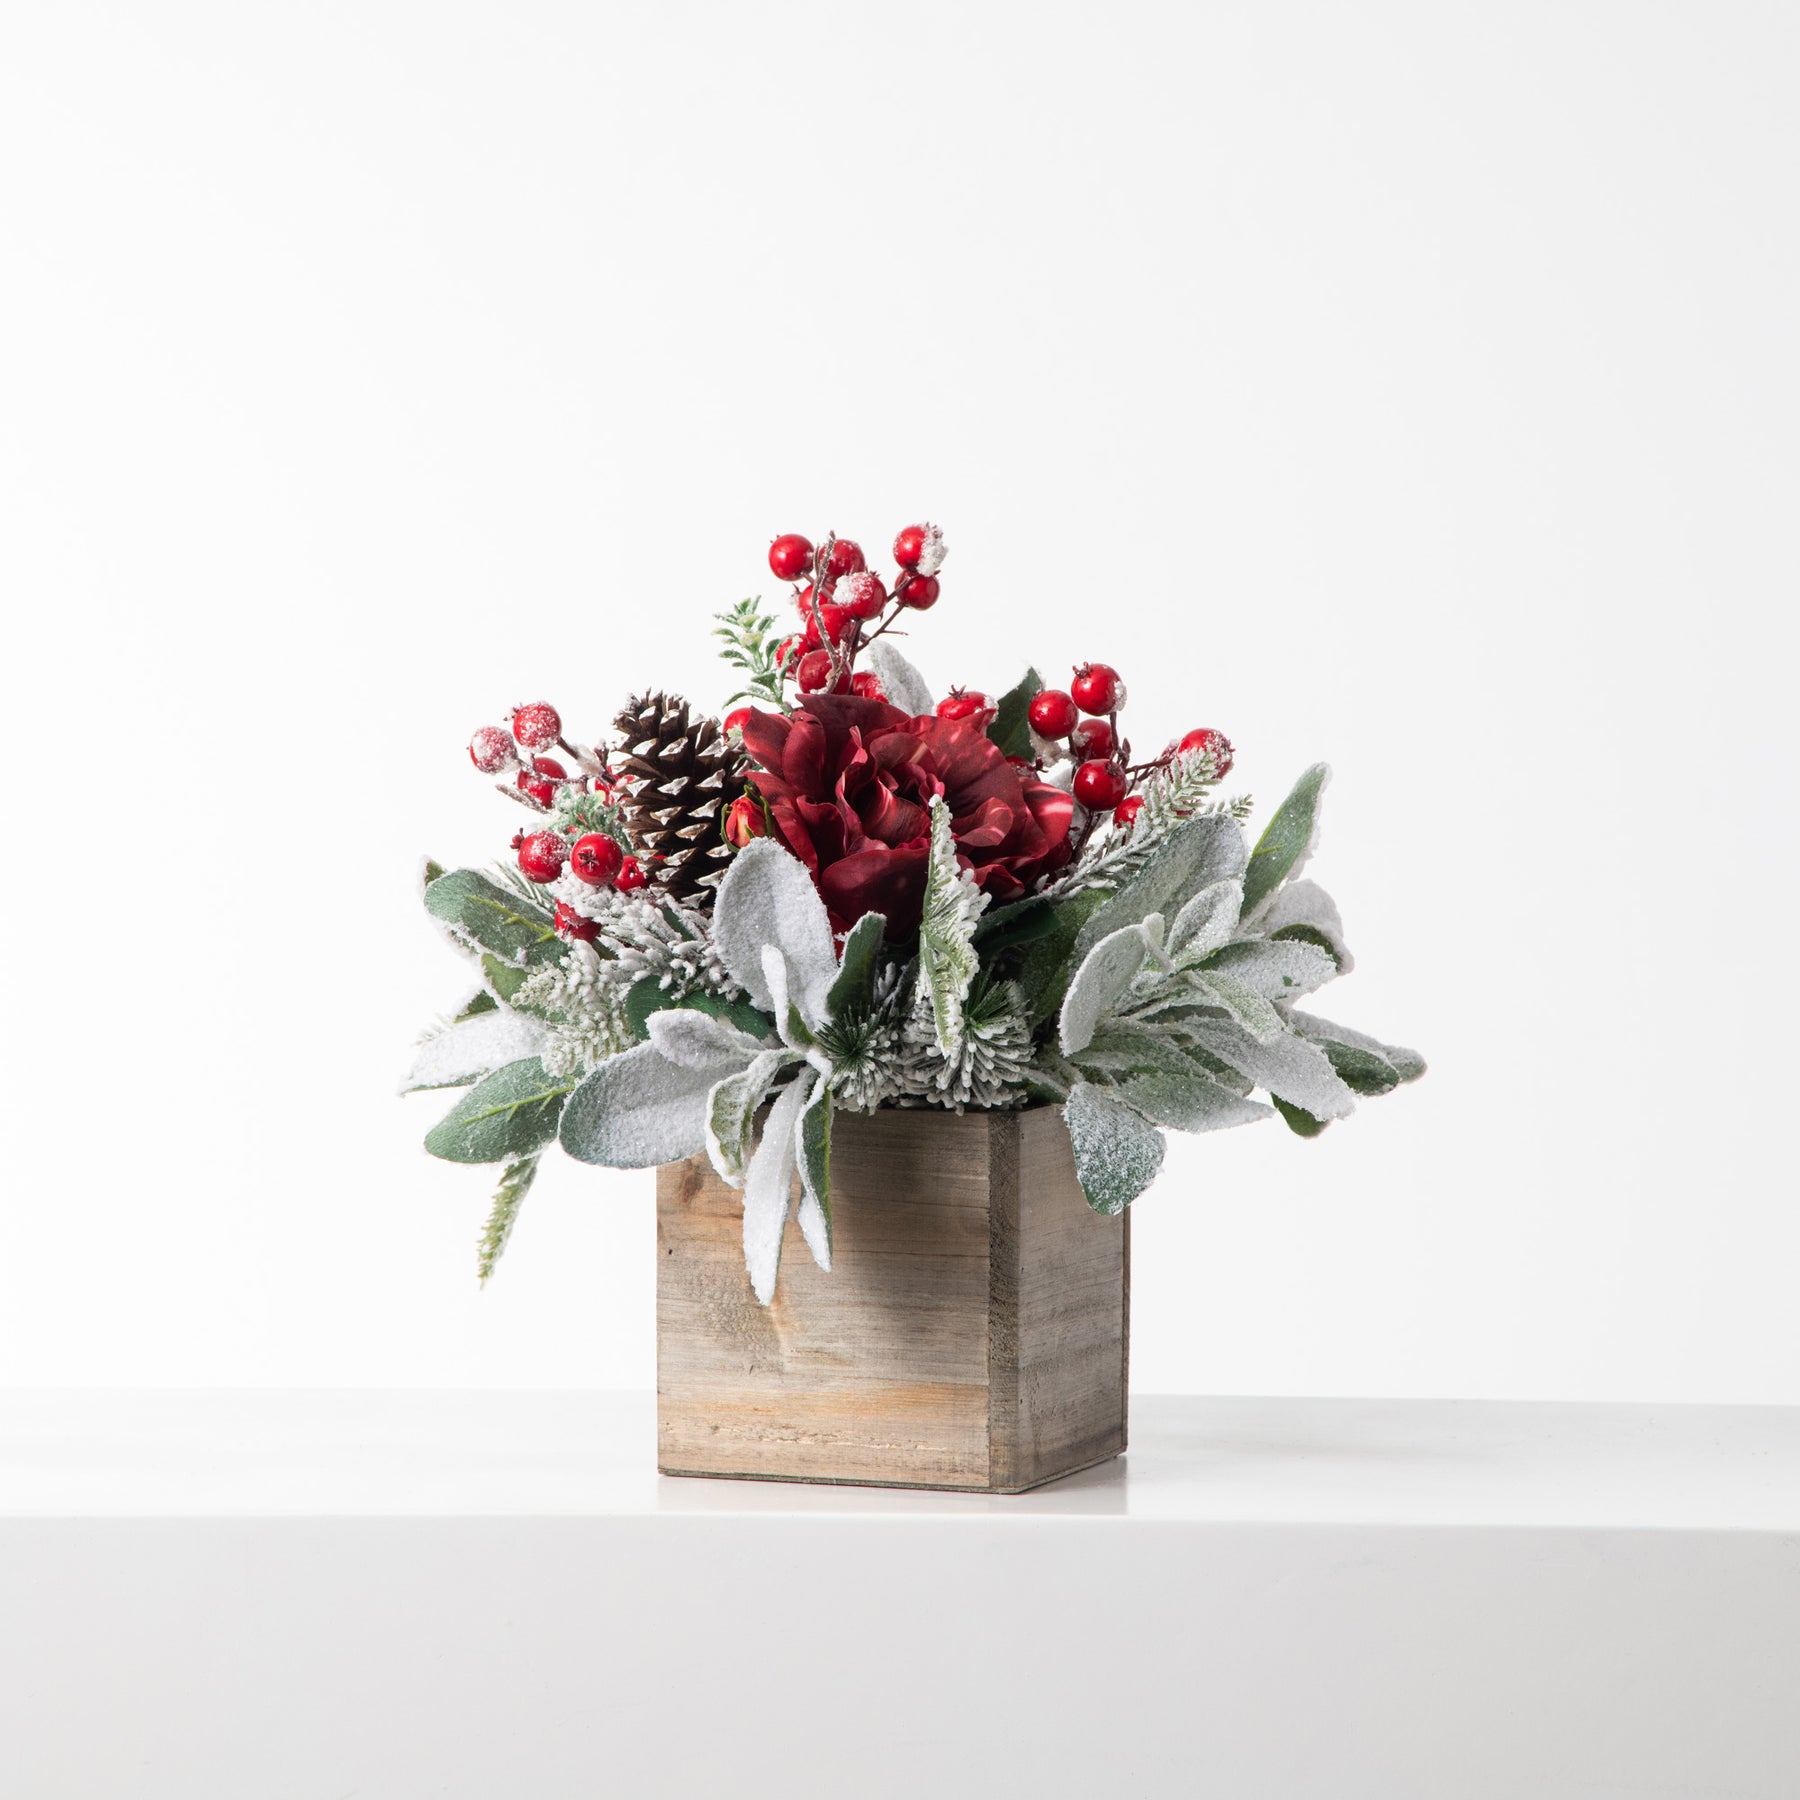 Winter Red Rose, Snowy Lamb's Ear & Holiday Berry Faux Floral Christma –  Darby Creek Trading